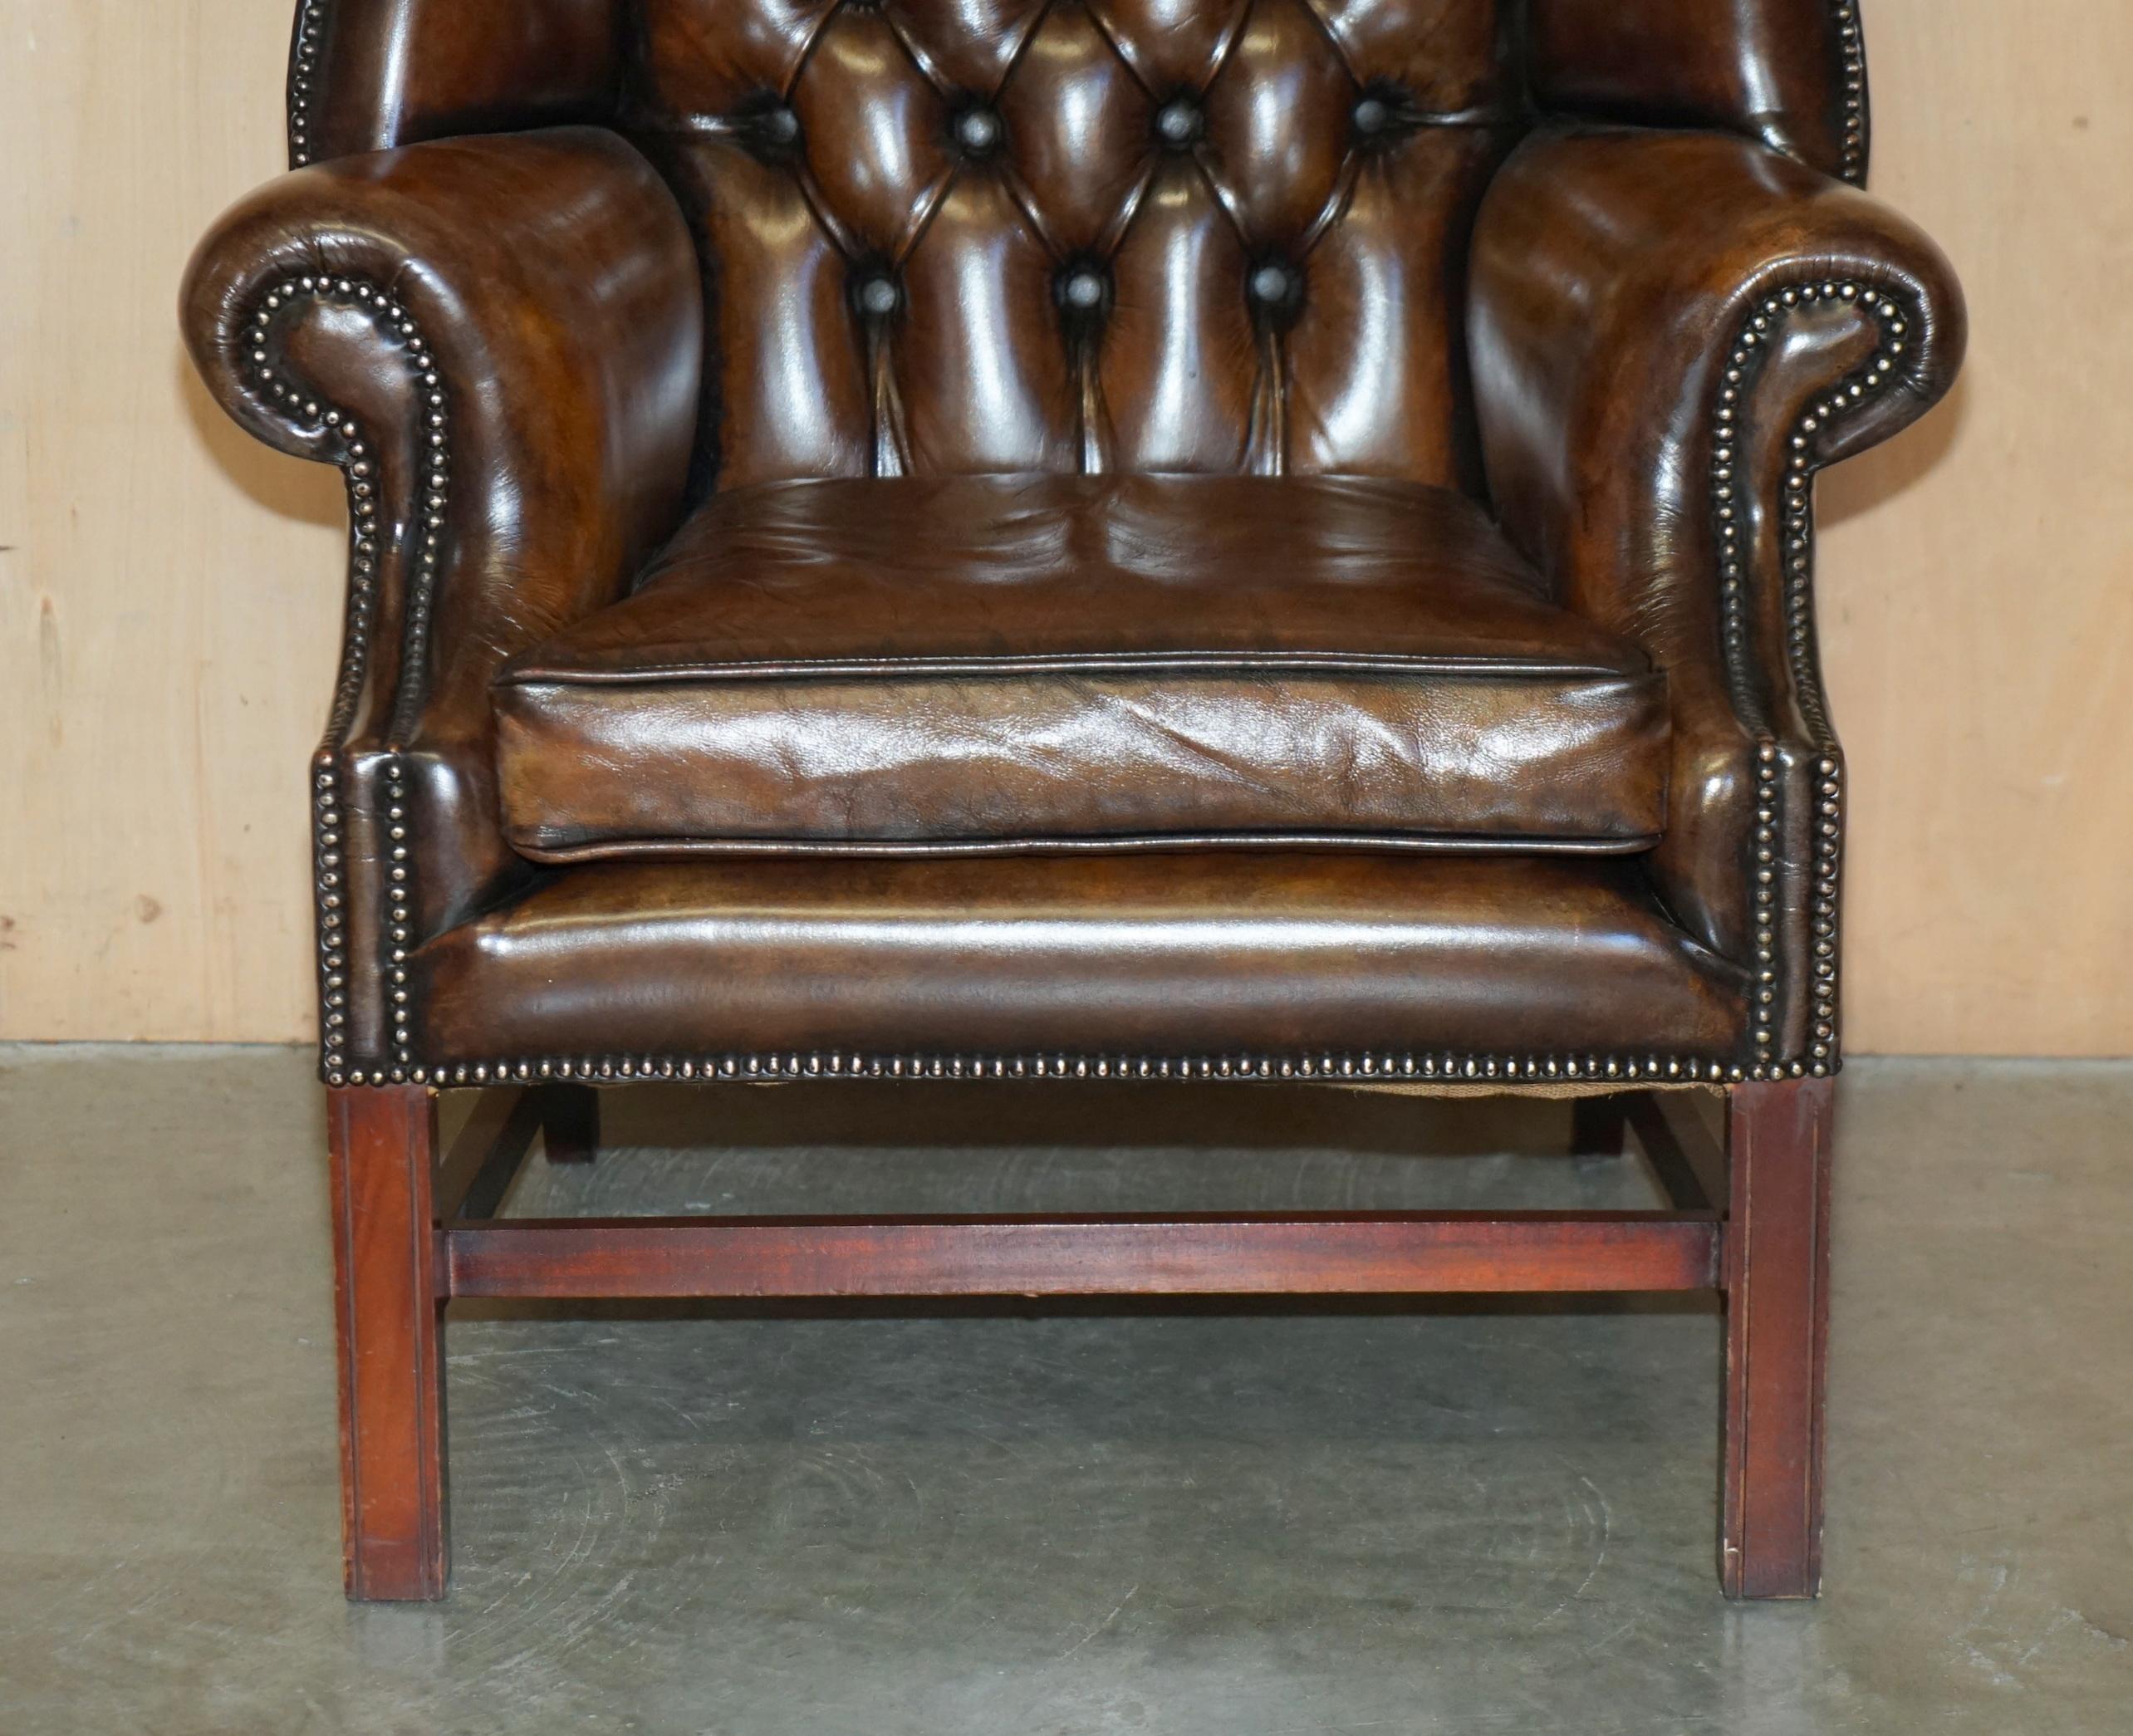 COMFORTABLE ViNTAGE RESTORED BROWN LEATHER TUFTED CHESTERFIELD WINGBACK ARMCHAIR im Angebot 3